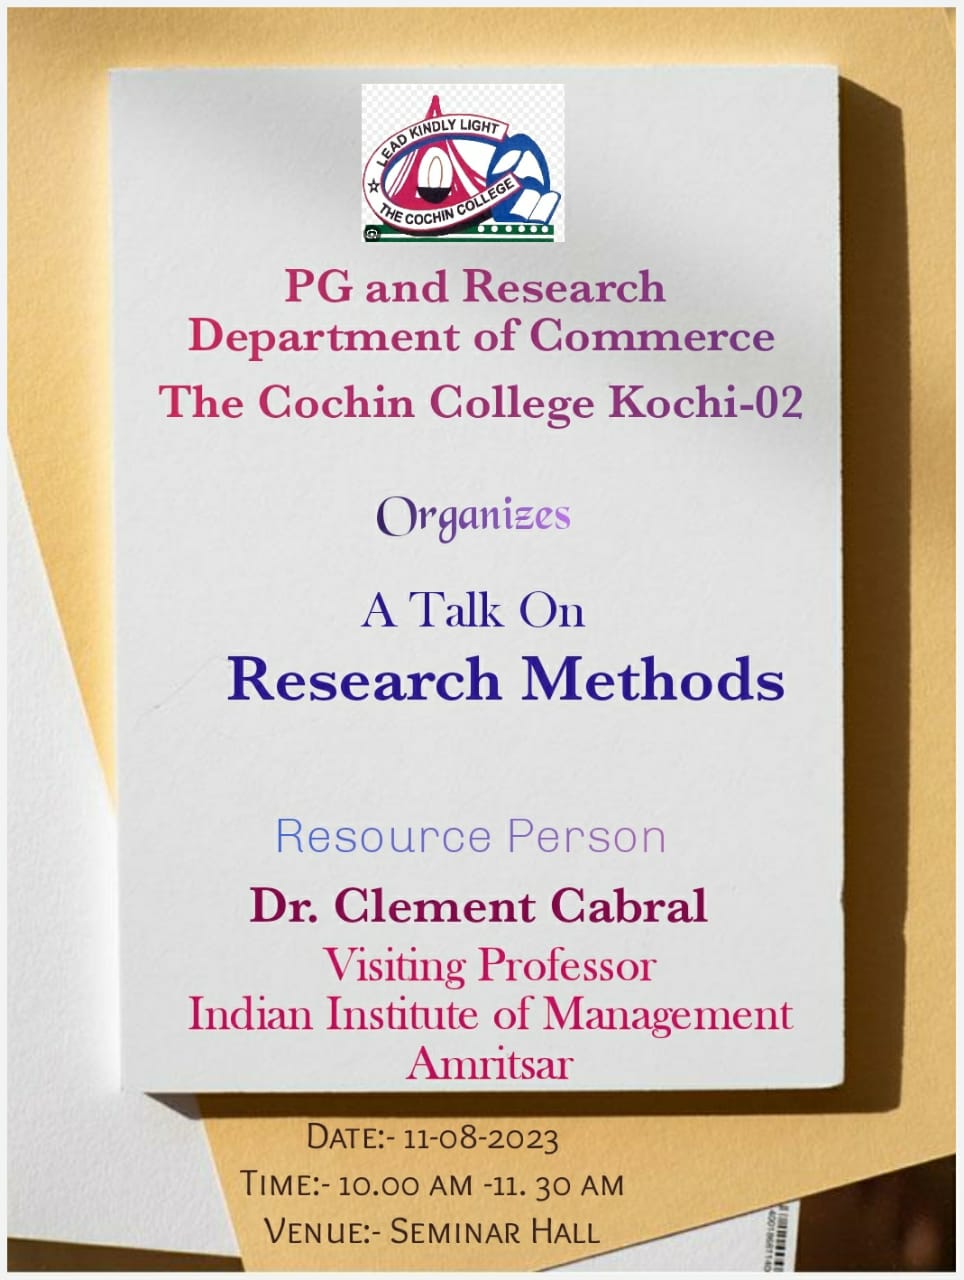 A Talk On Research Methods